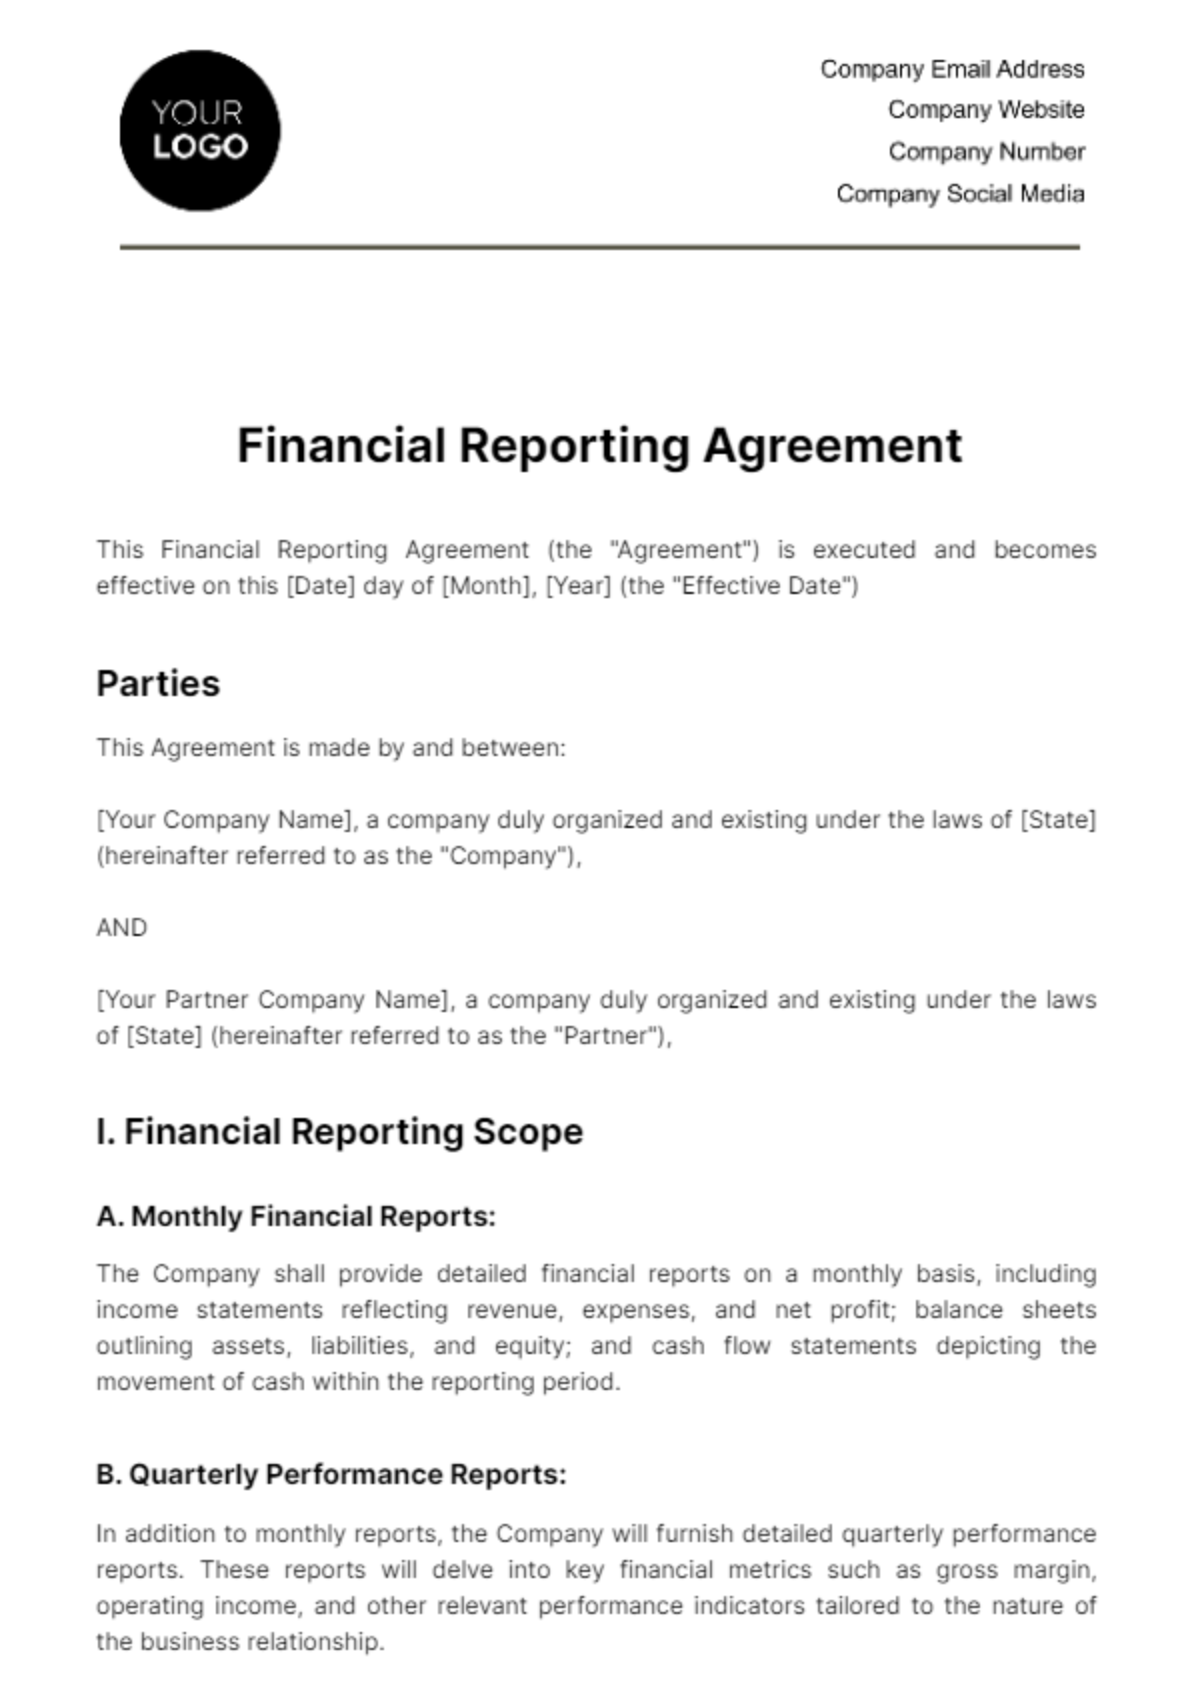 Financial Reporting Agreement Template